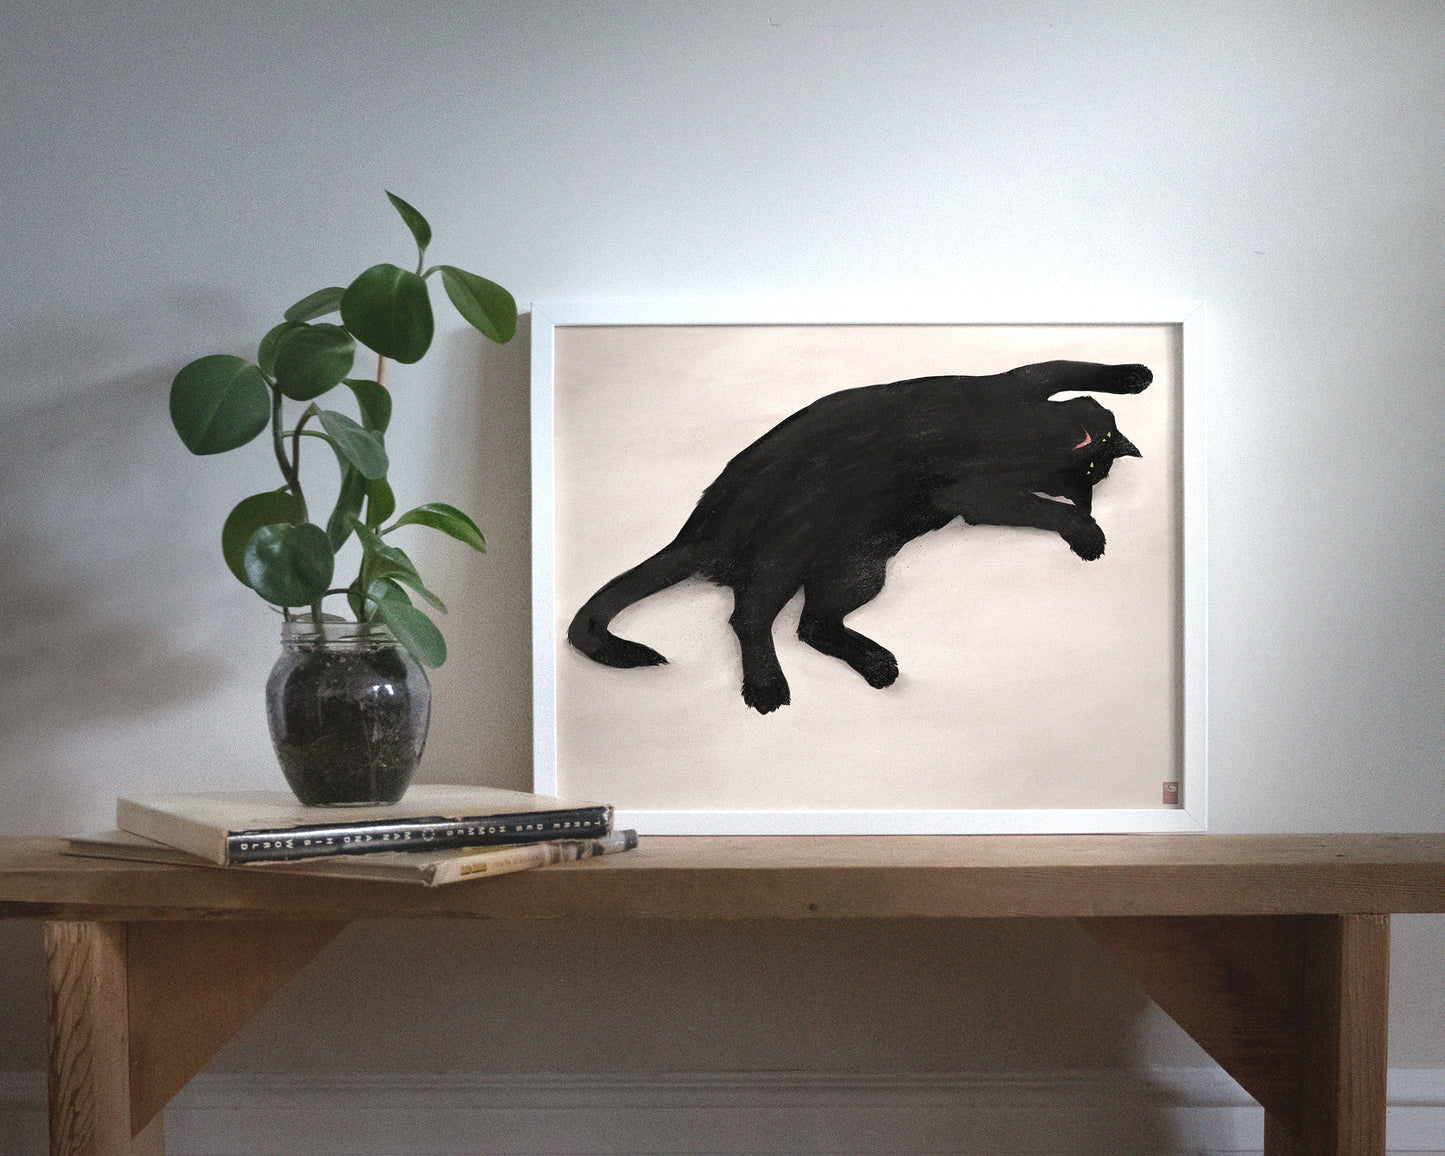 "Sillhouette of Woodhouse" by Catherine Hébert - Cat Silhouette Giclee Art Print